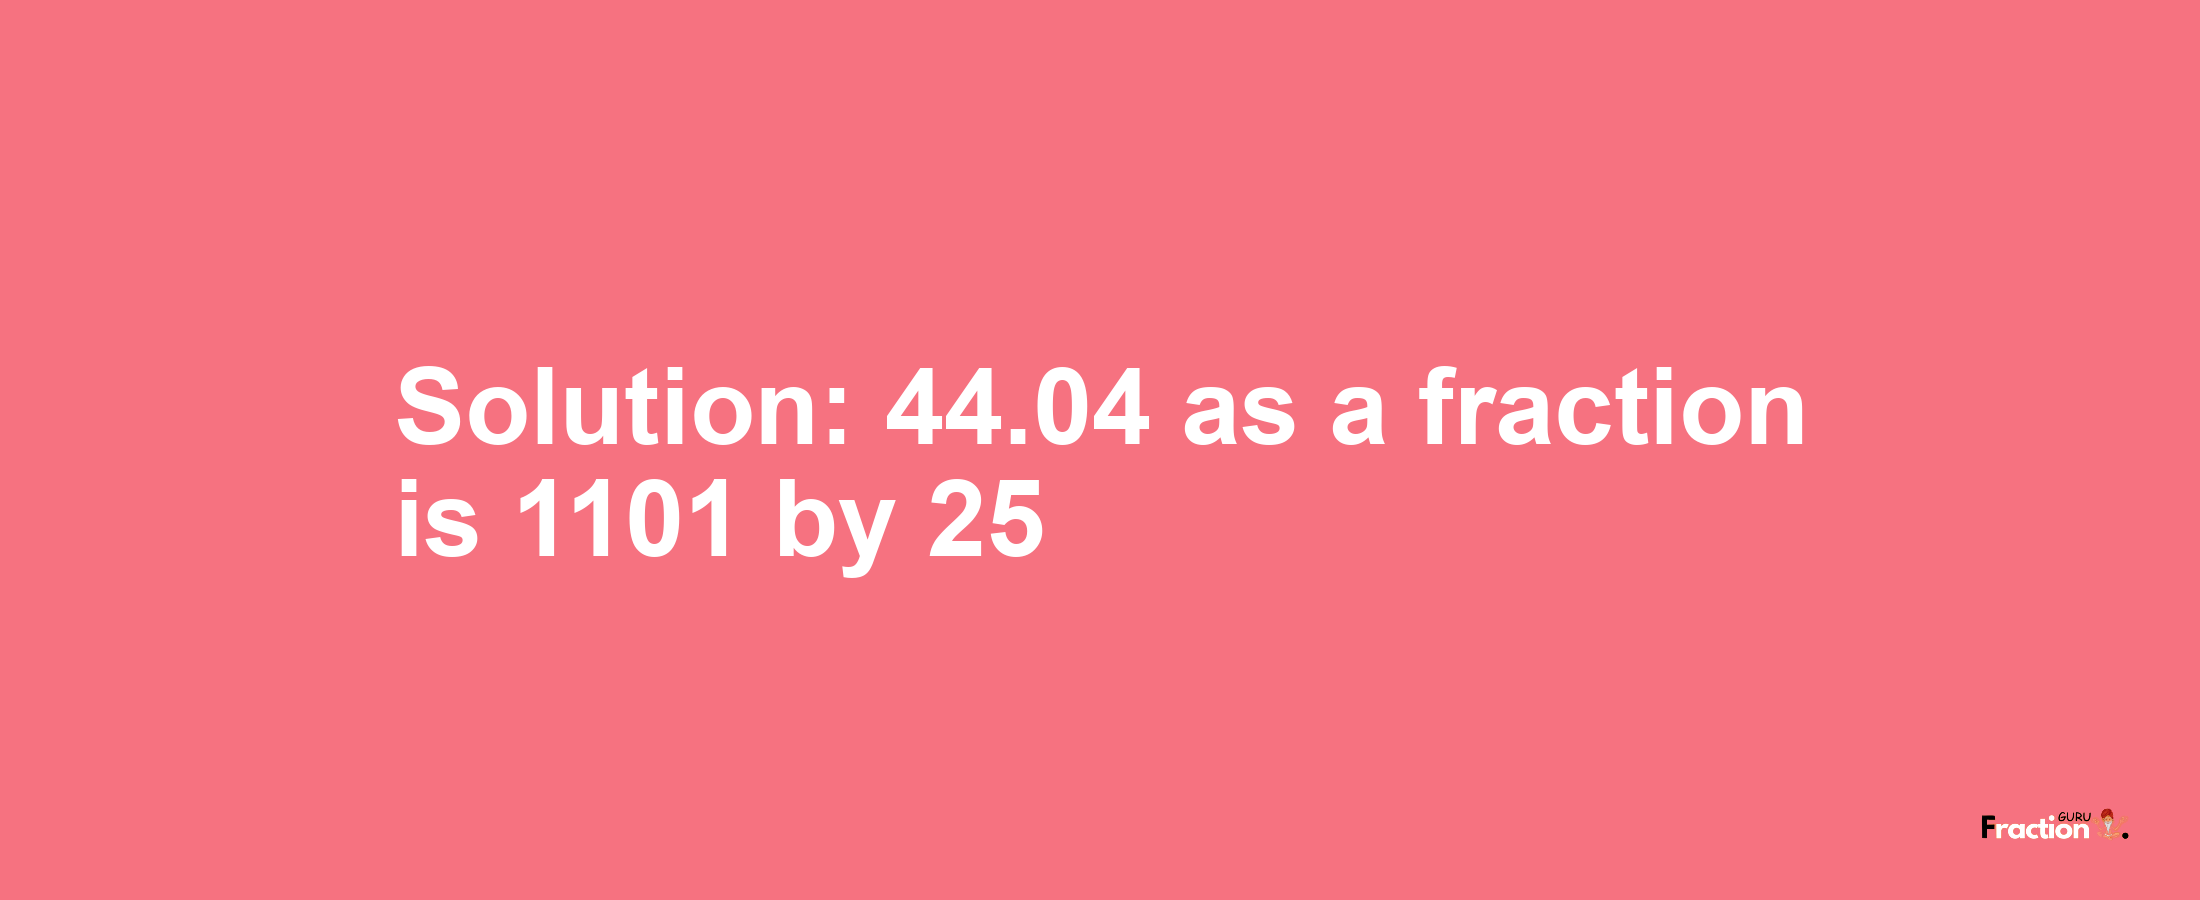 Solution:44.04 as a fraction is 1101/25